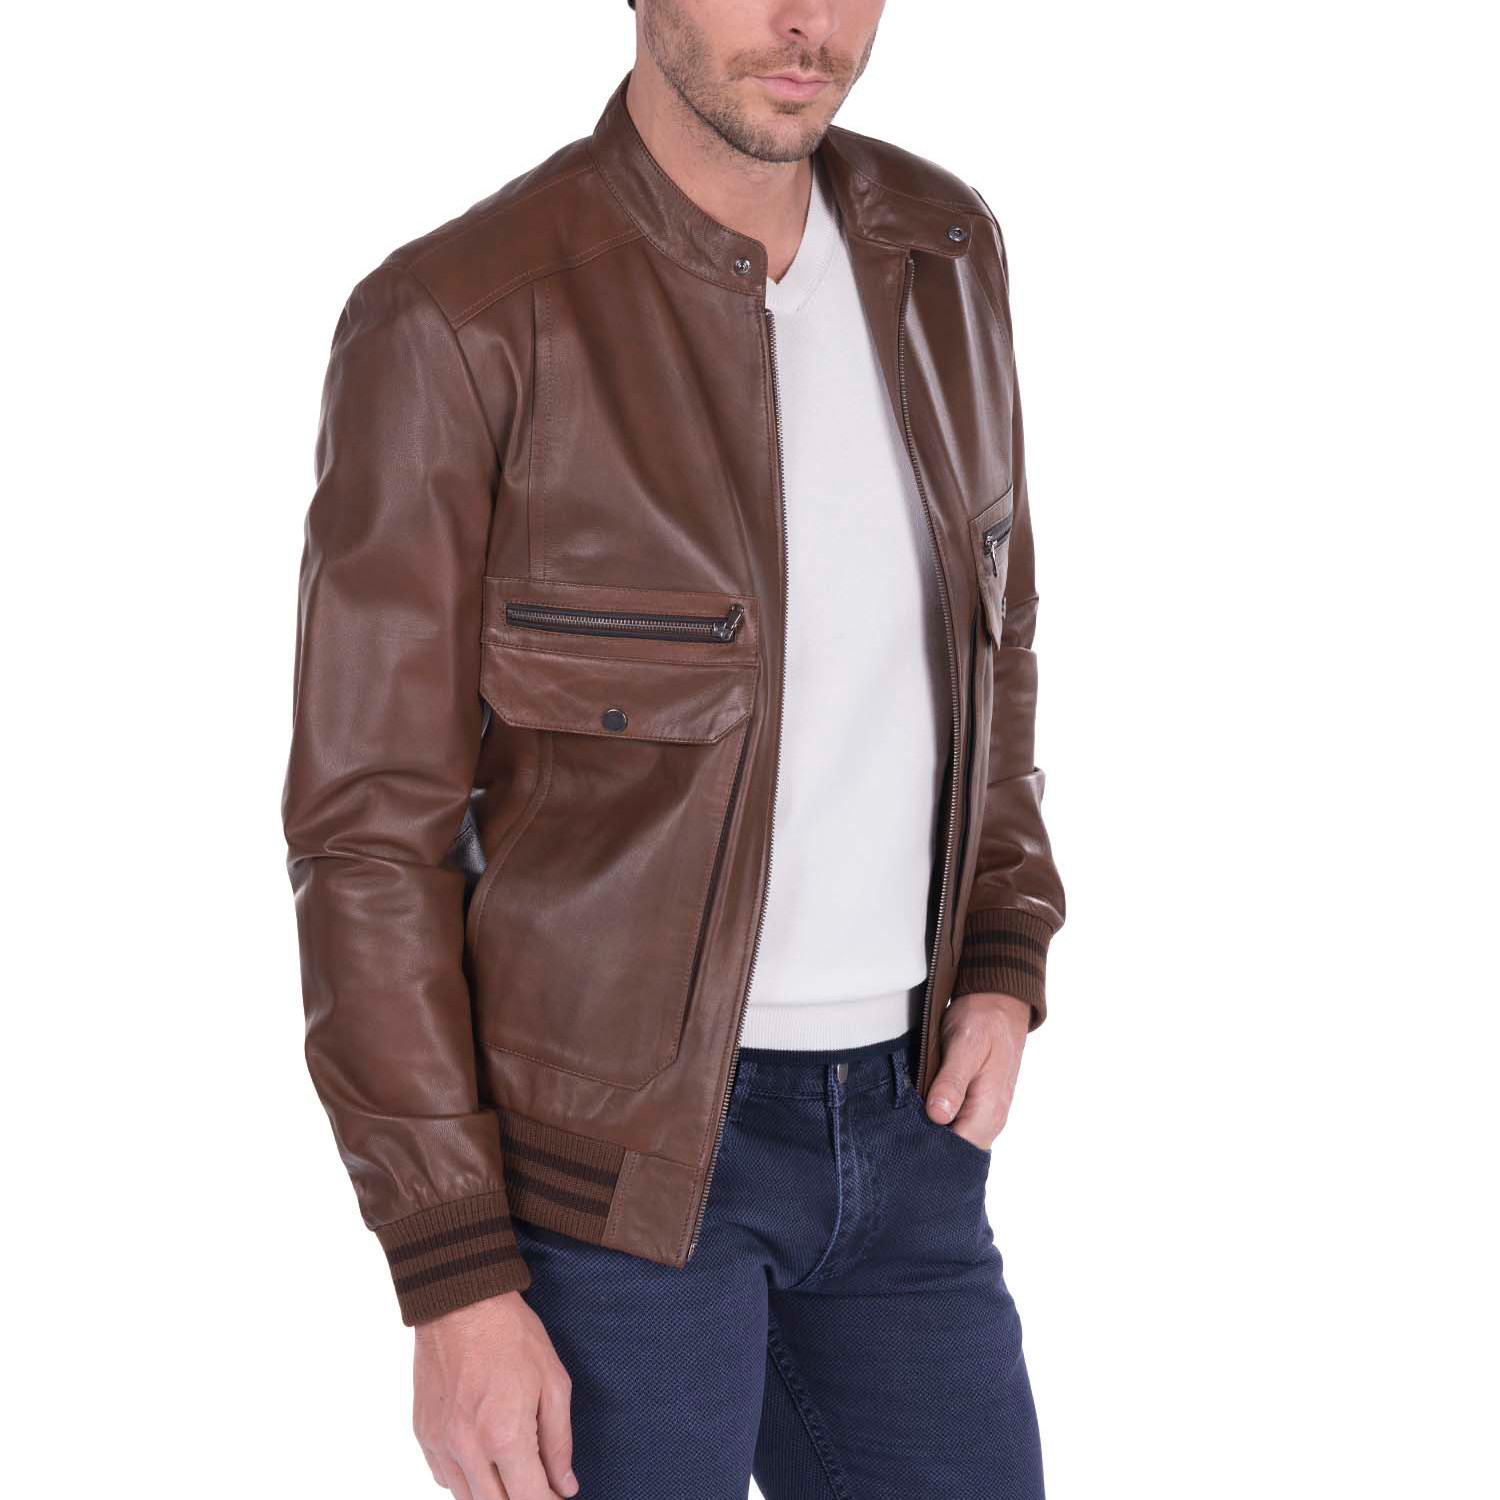 Lob Leather Jacket // Brown (3XL) - Outerwear Clearance - Touch of Modern